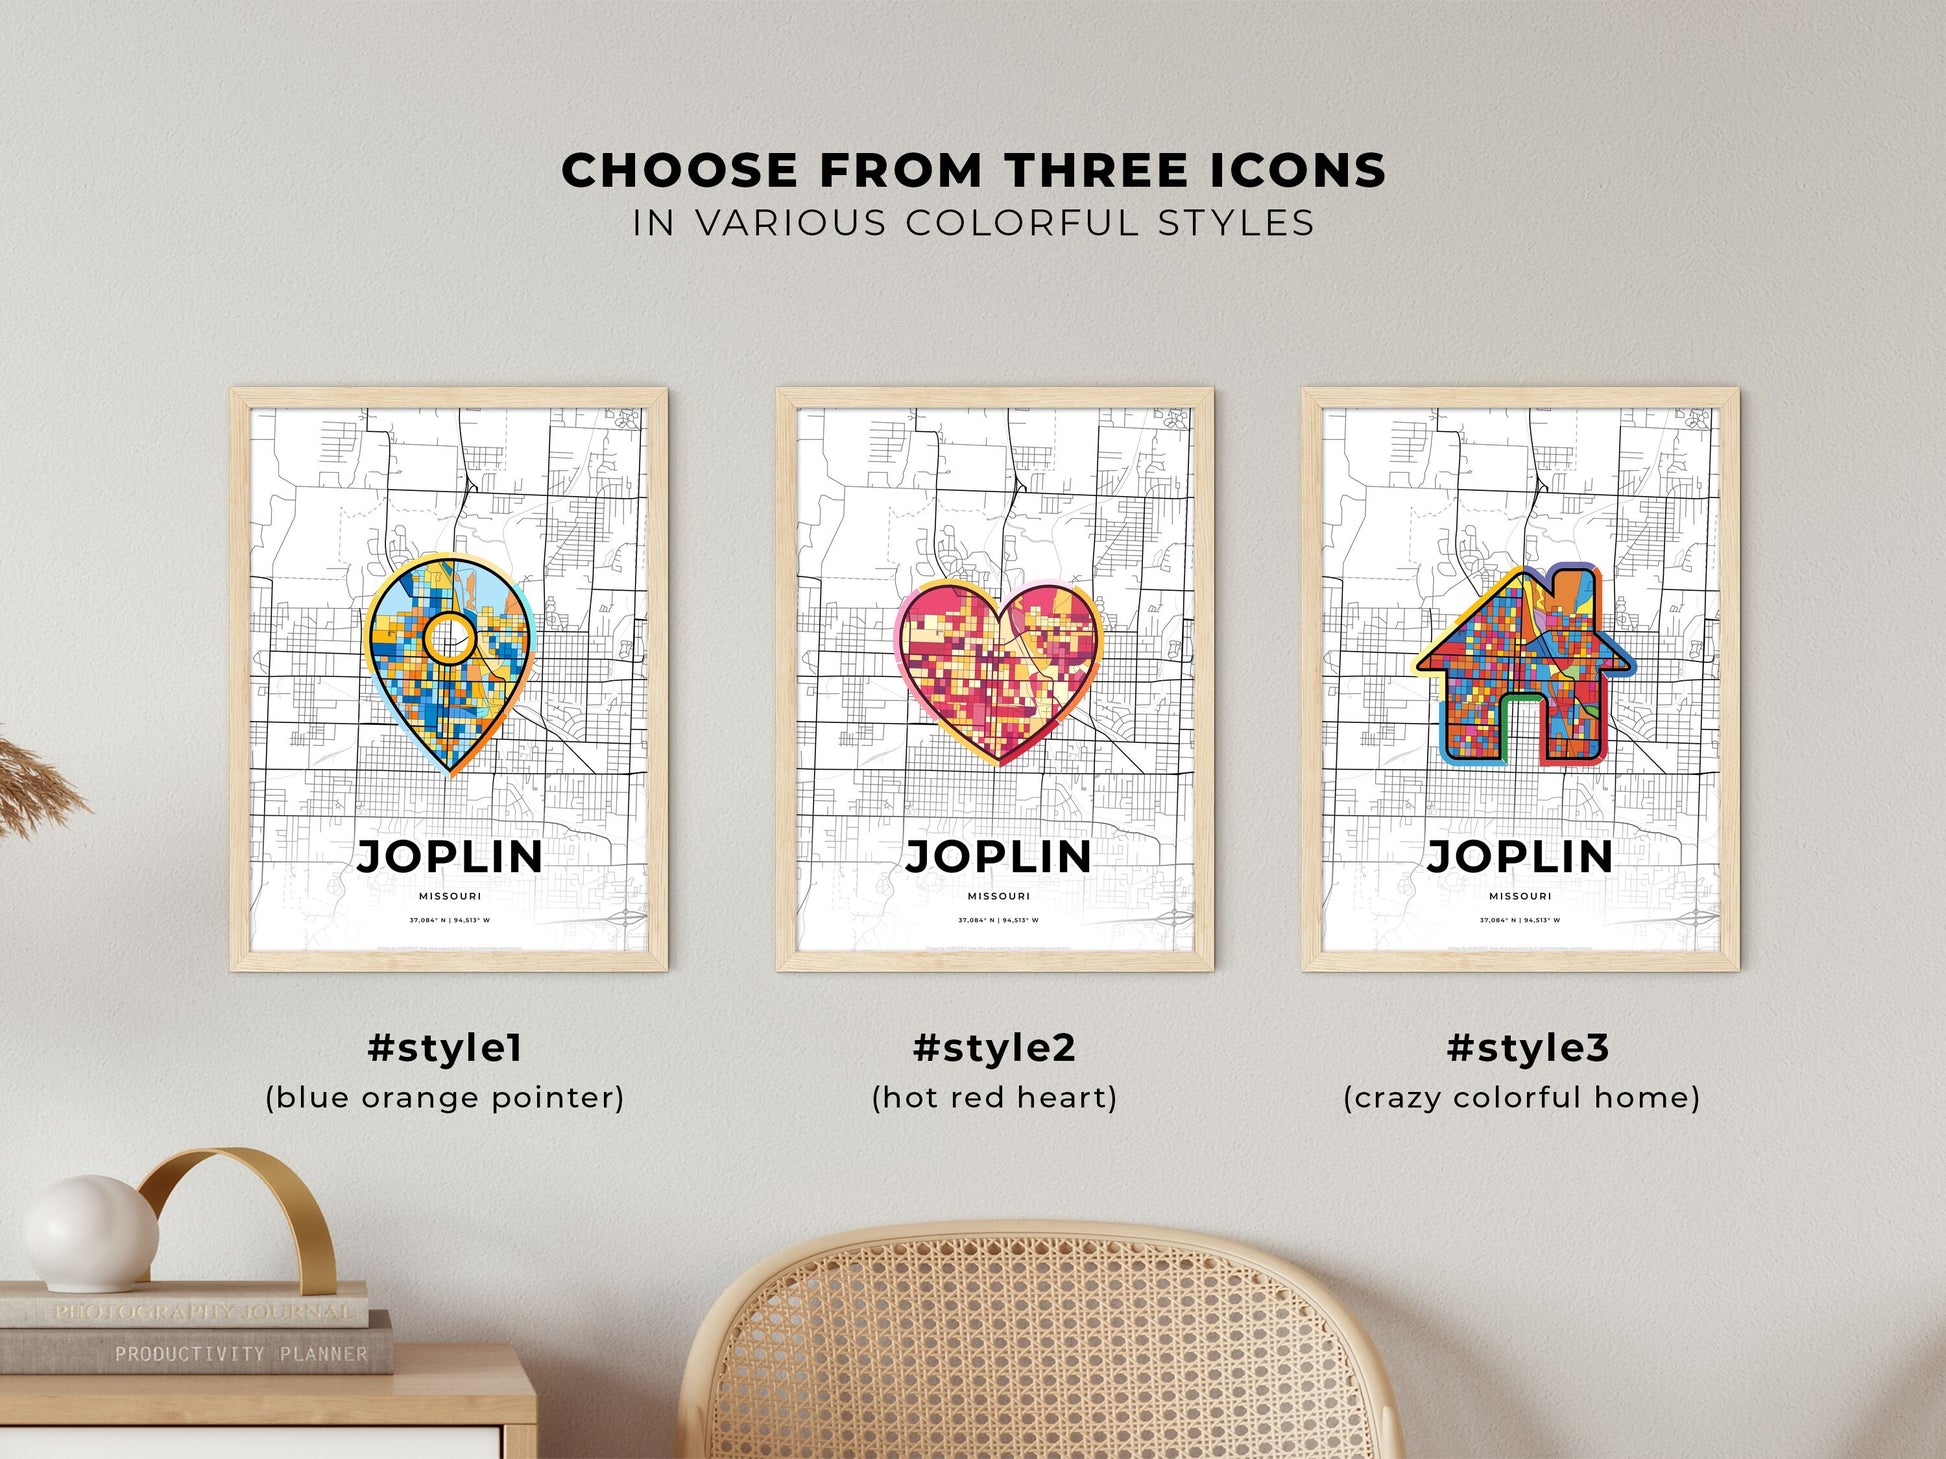 JOPLIN MISSOURI minimal art map with a colorful icon. Where it all began, Couple map gift.